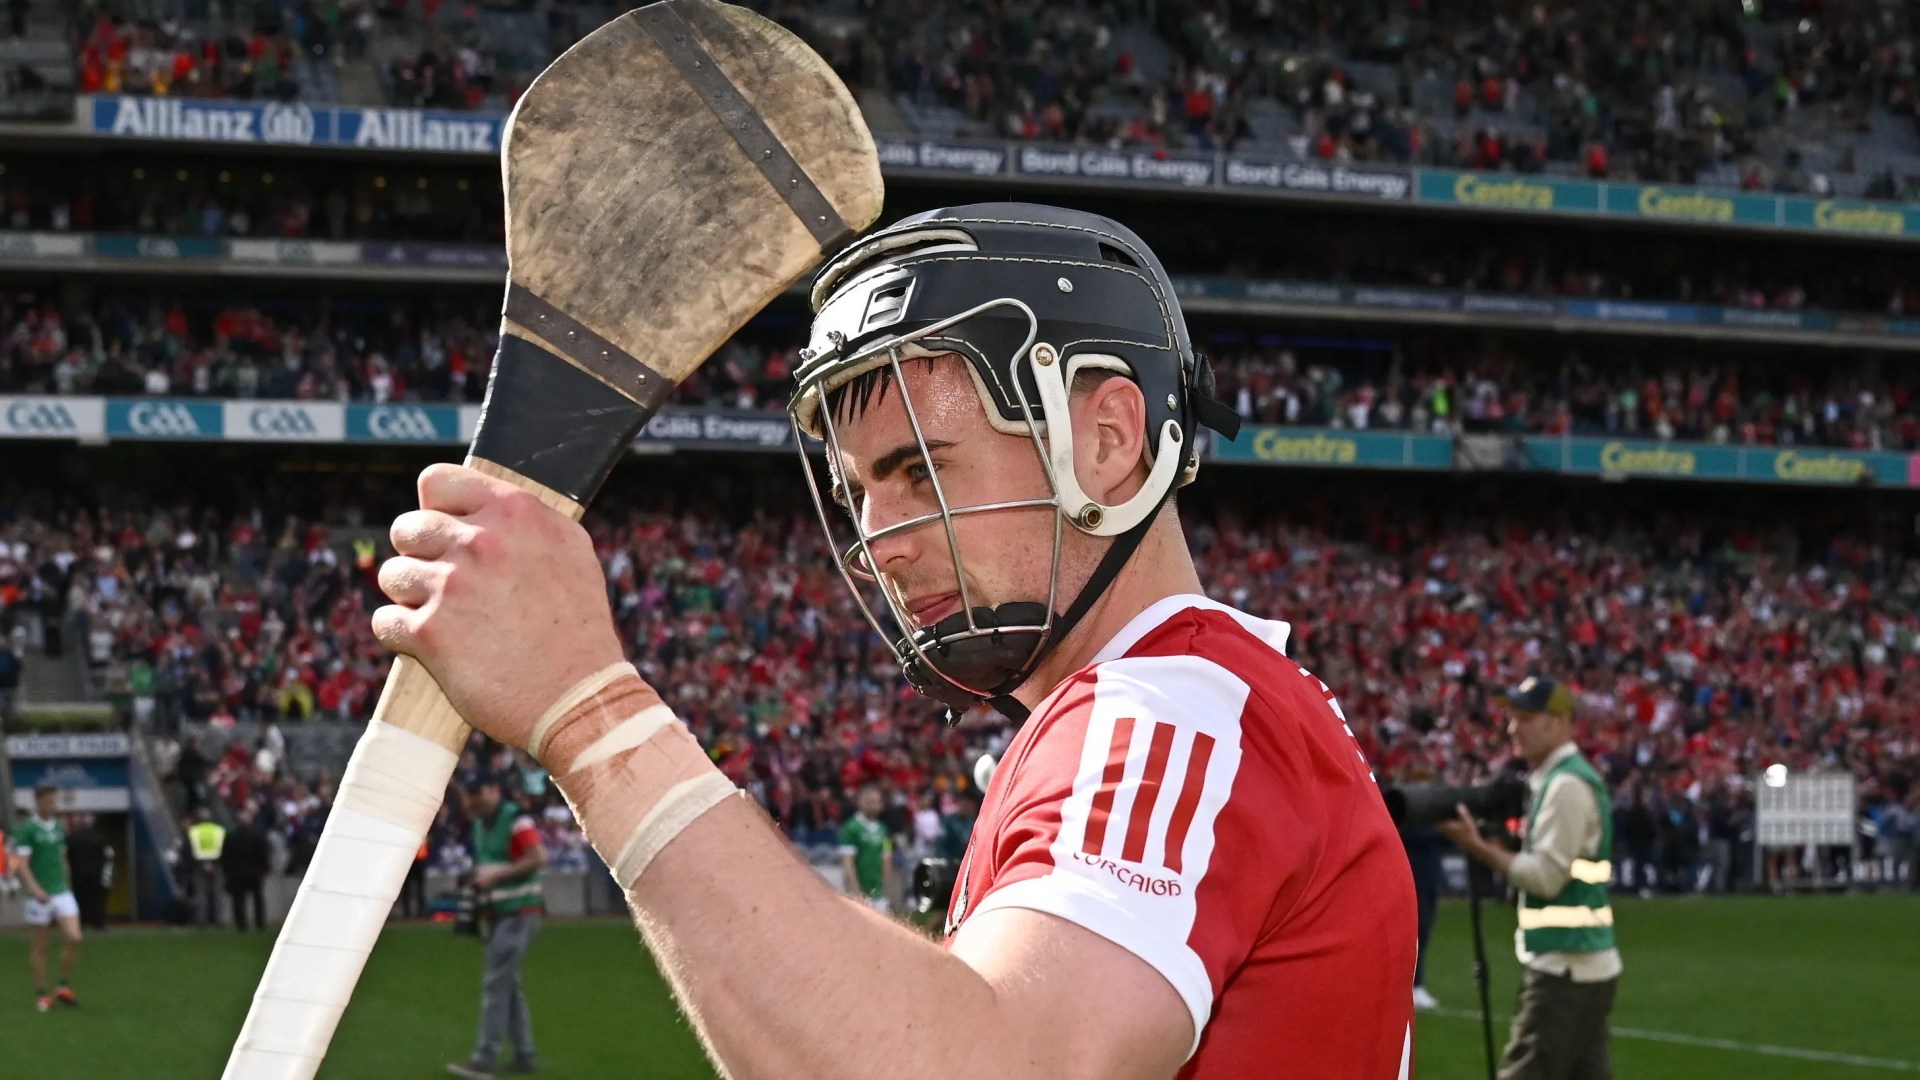 Cork ace Darragh Fitzgibbon eyeing redemption in All-Ireland final against Clare [Video]